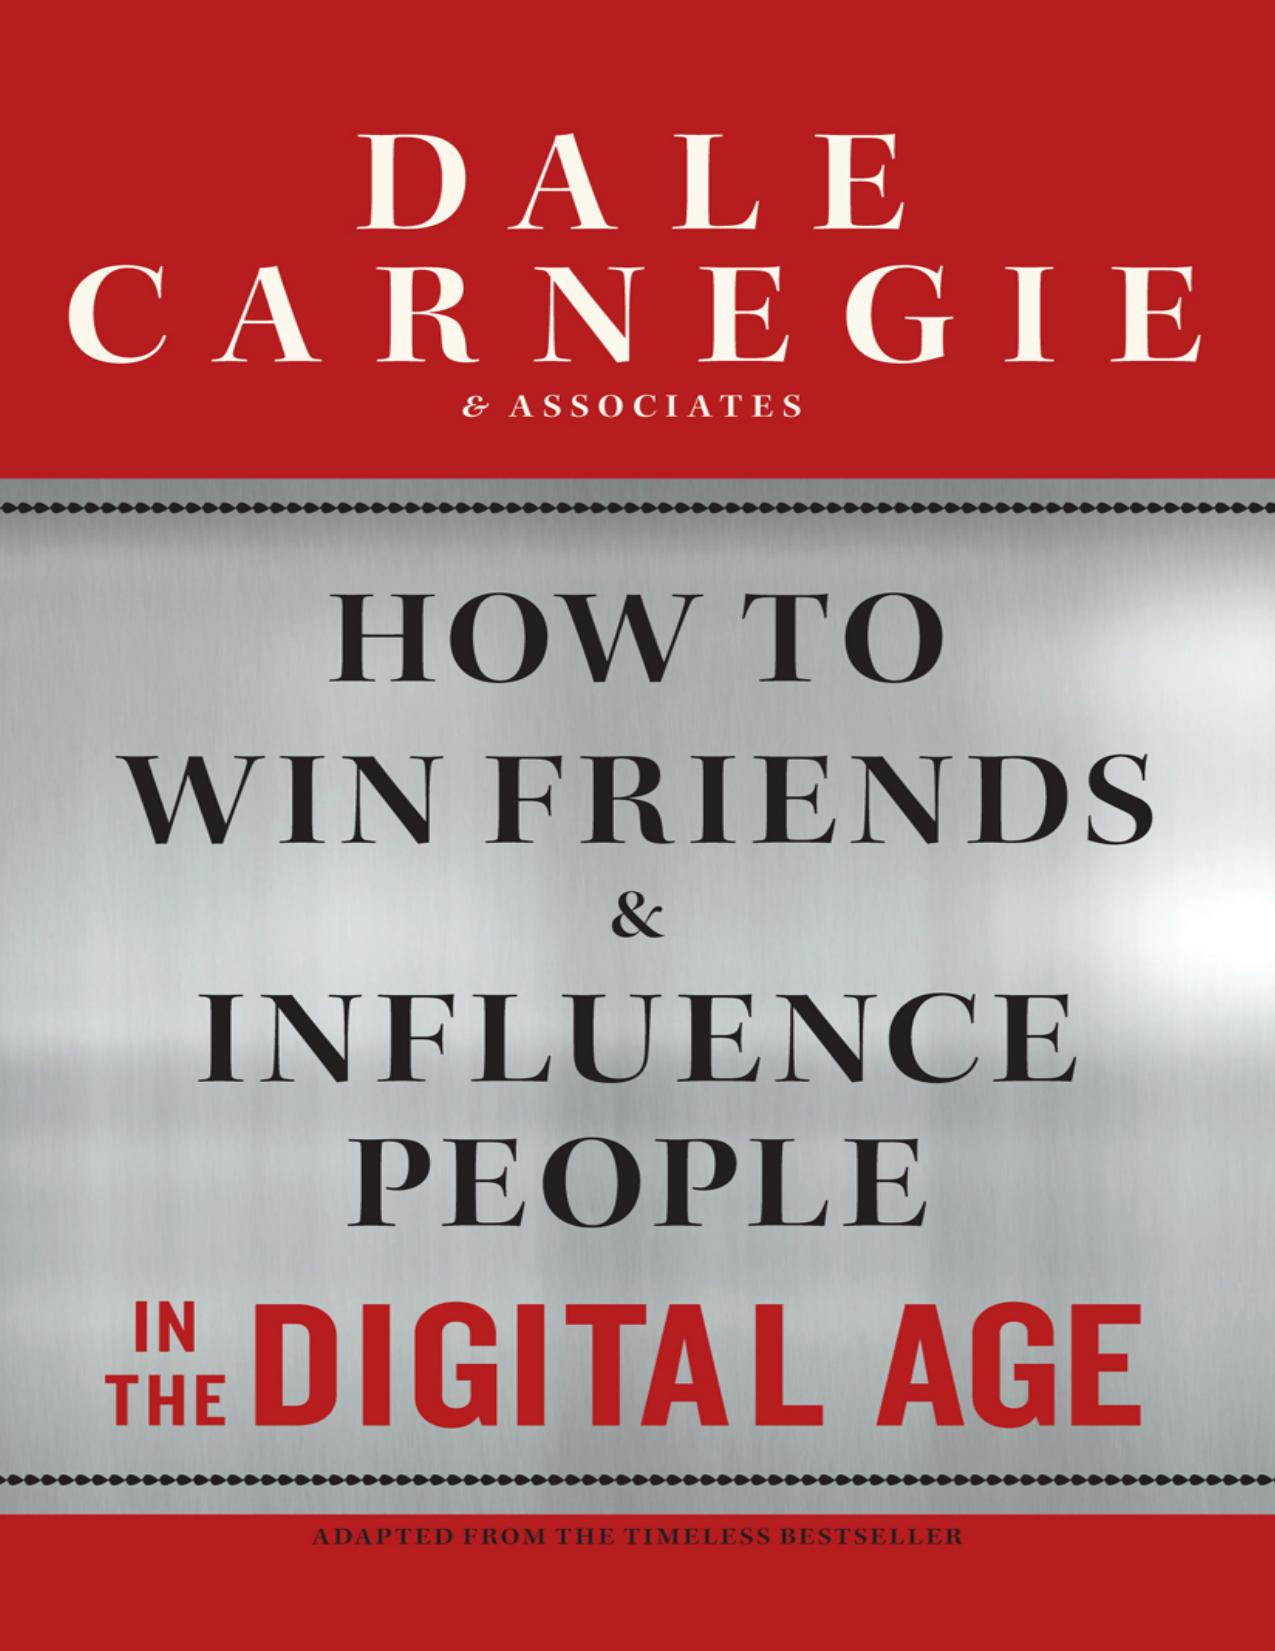 How to Win Friends and Influence People in the Digital Age by Dale Carnegie & Associates